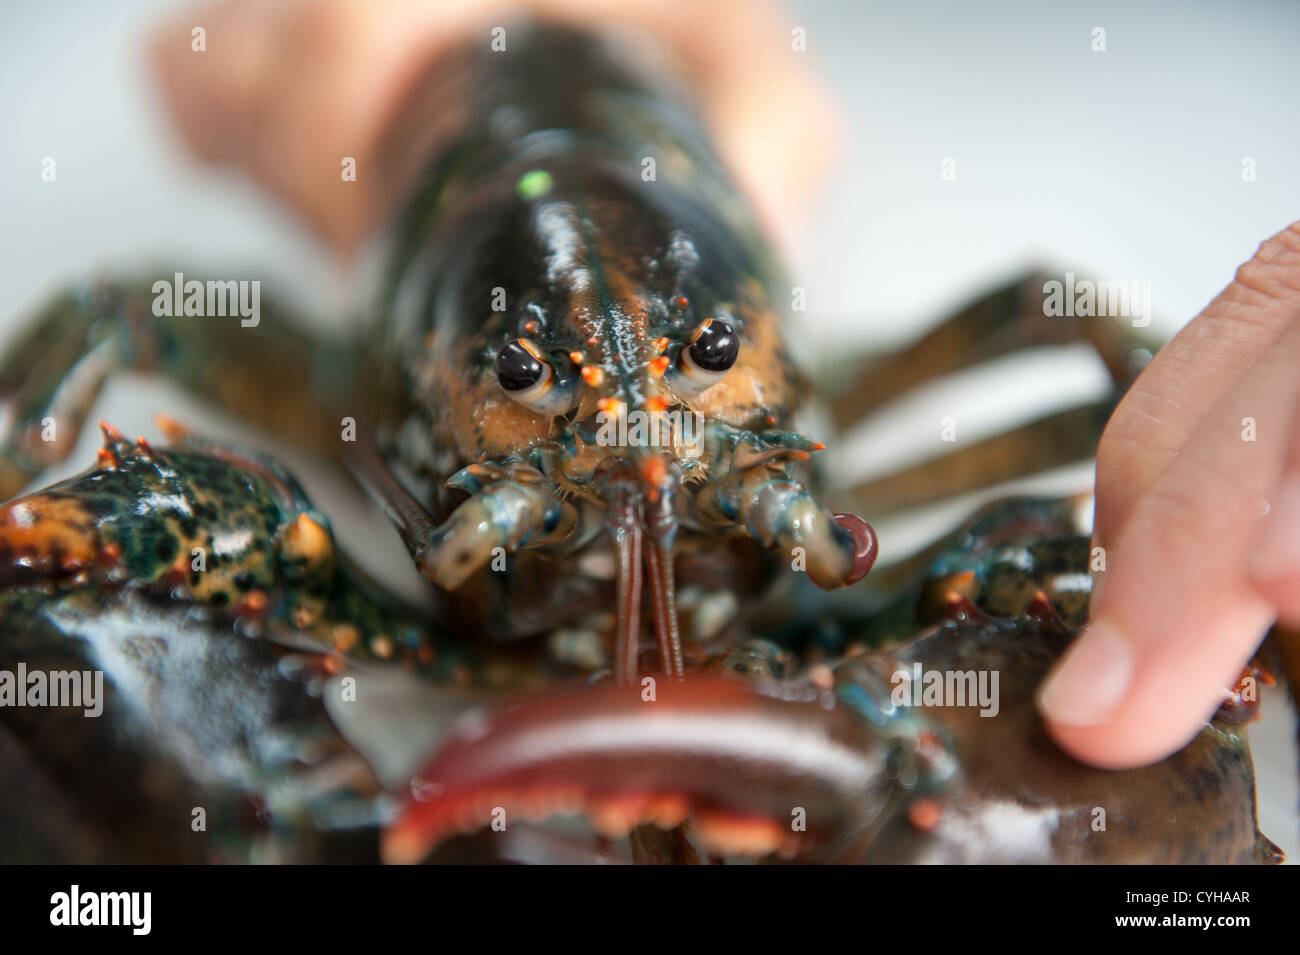 Scientist's hand holding a lobster in aquatic research lab Stock Photo